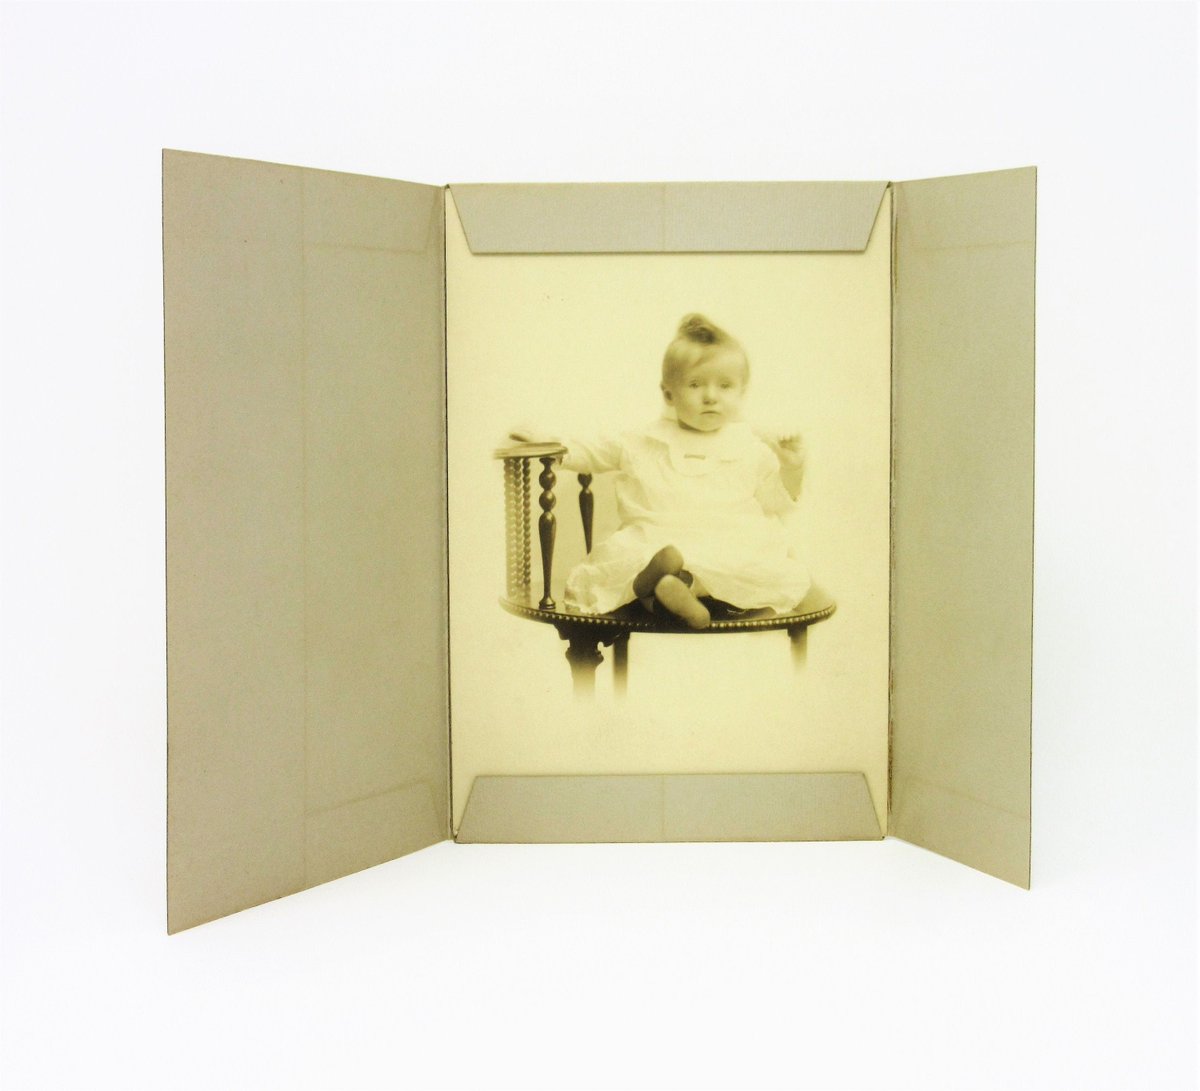 Antique Photograph of a Sweet Baby Dressed in White and Seated on a Victorian Era Chair, Sepia Tone Cabinet Card, Vintage Portrait, Ephemera tuppu.net/34192d11 #vintage #etsyseller #Etsy #VintagePhotograph